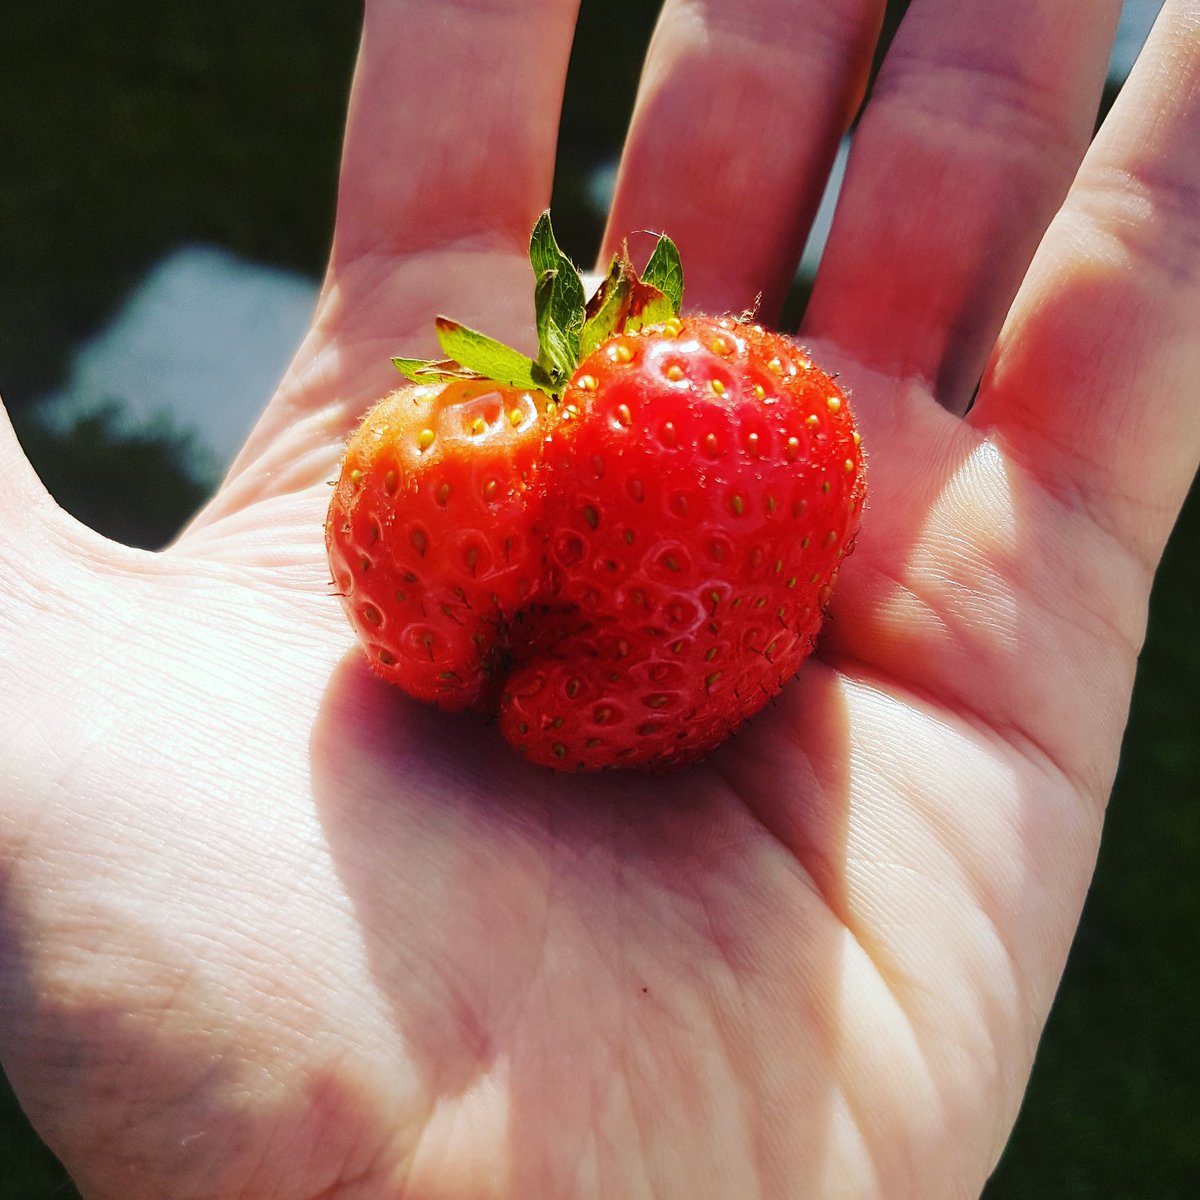 First strawberry of the season and yes it was as tastt as it looks 🍓 Hopefully the rest will follow shortly #strawberry #organicstrawberry #organicallotment #organicfood